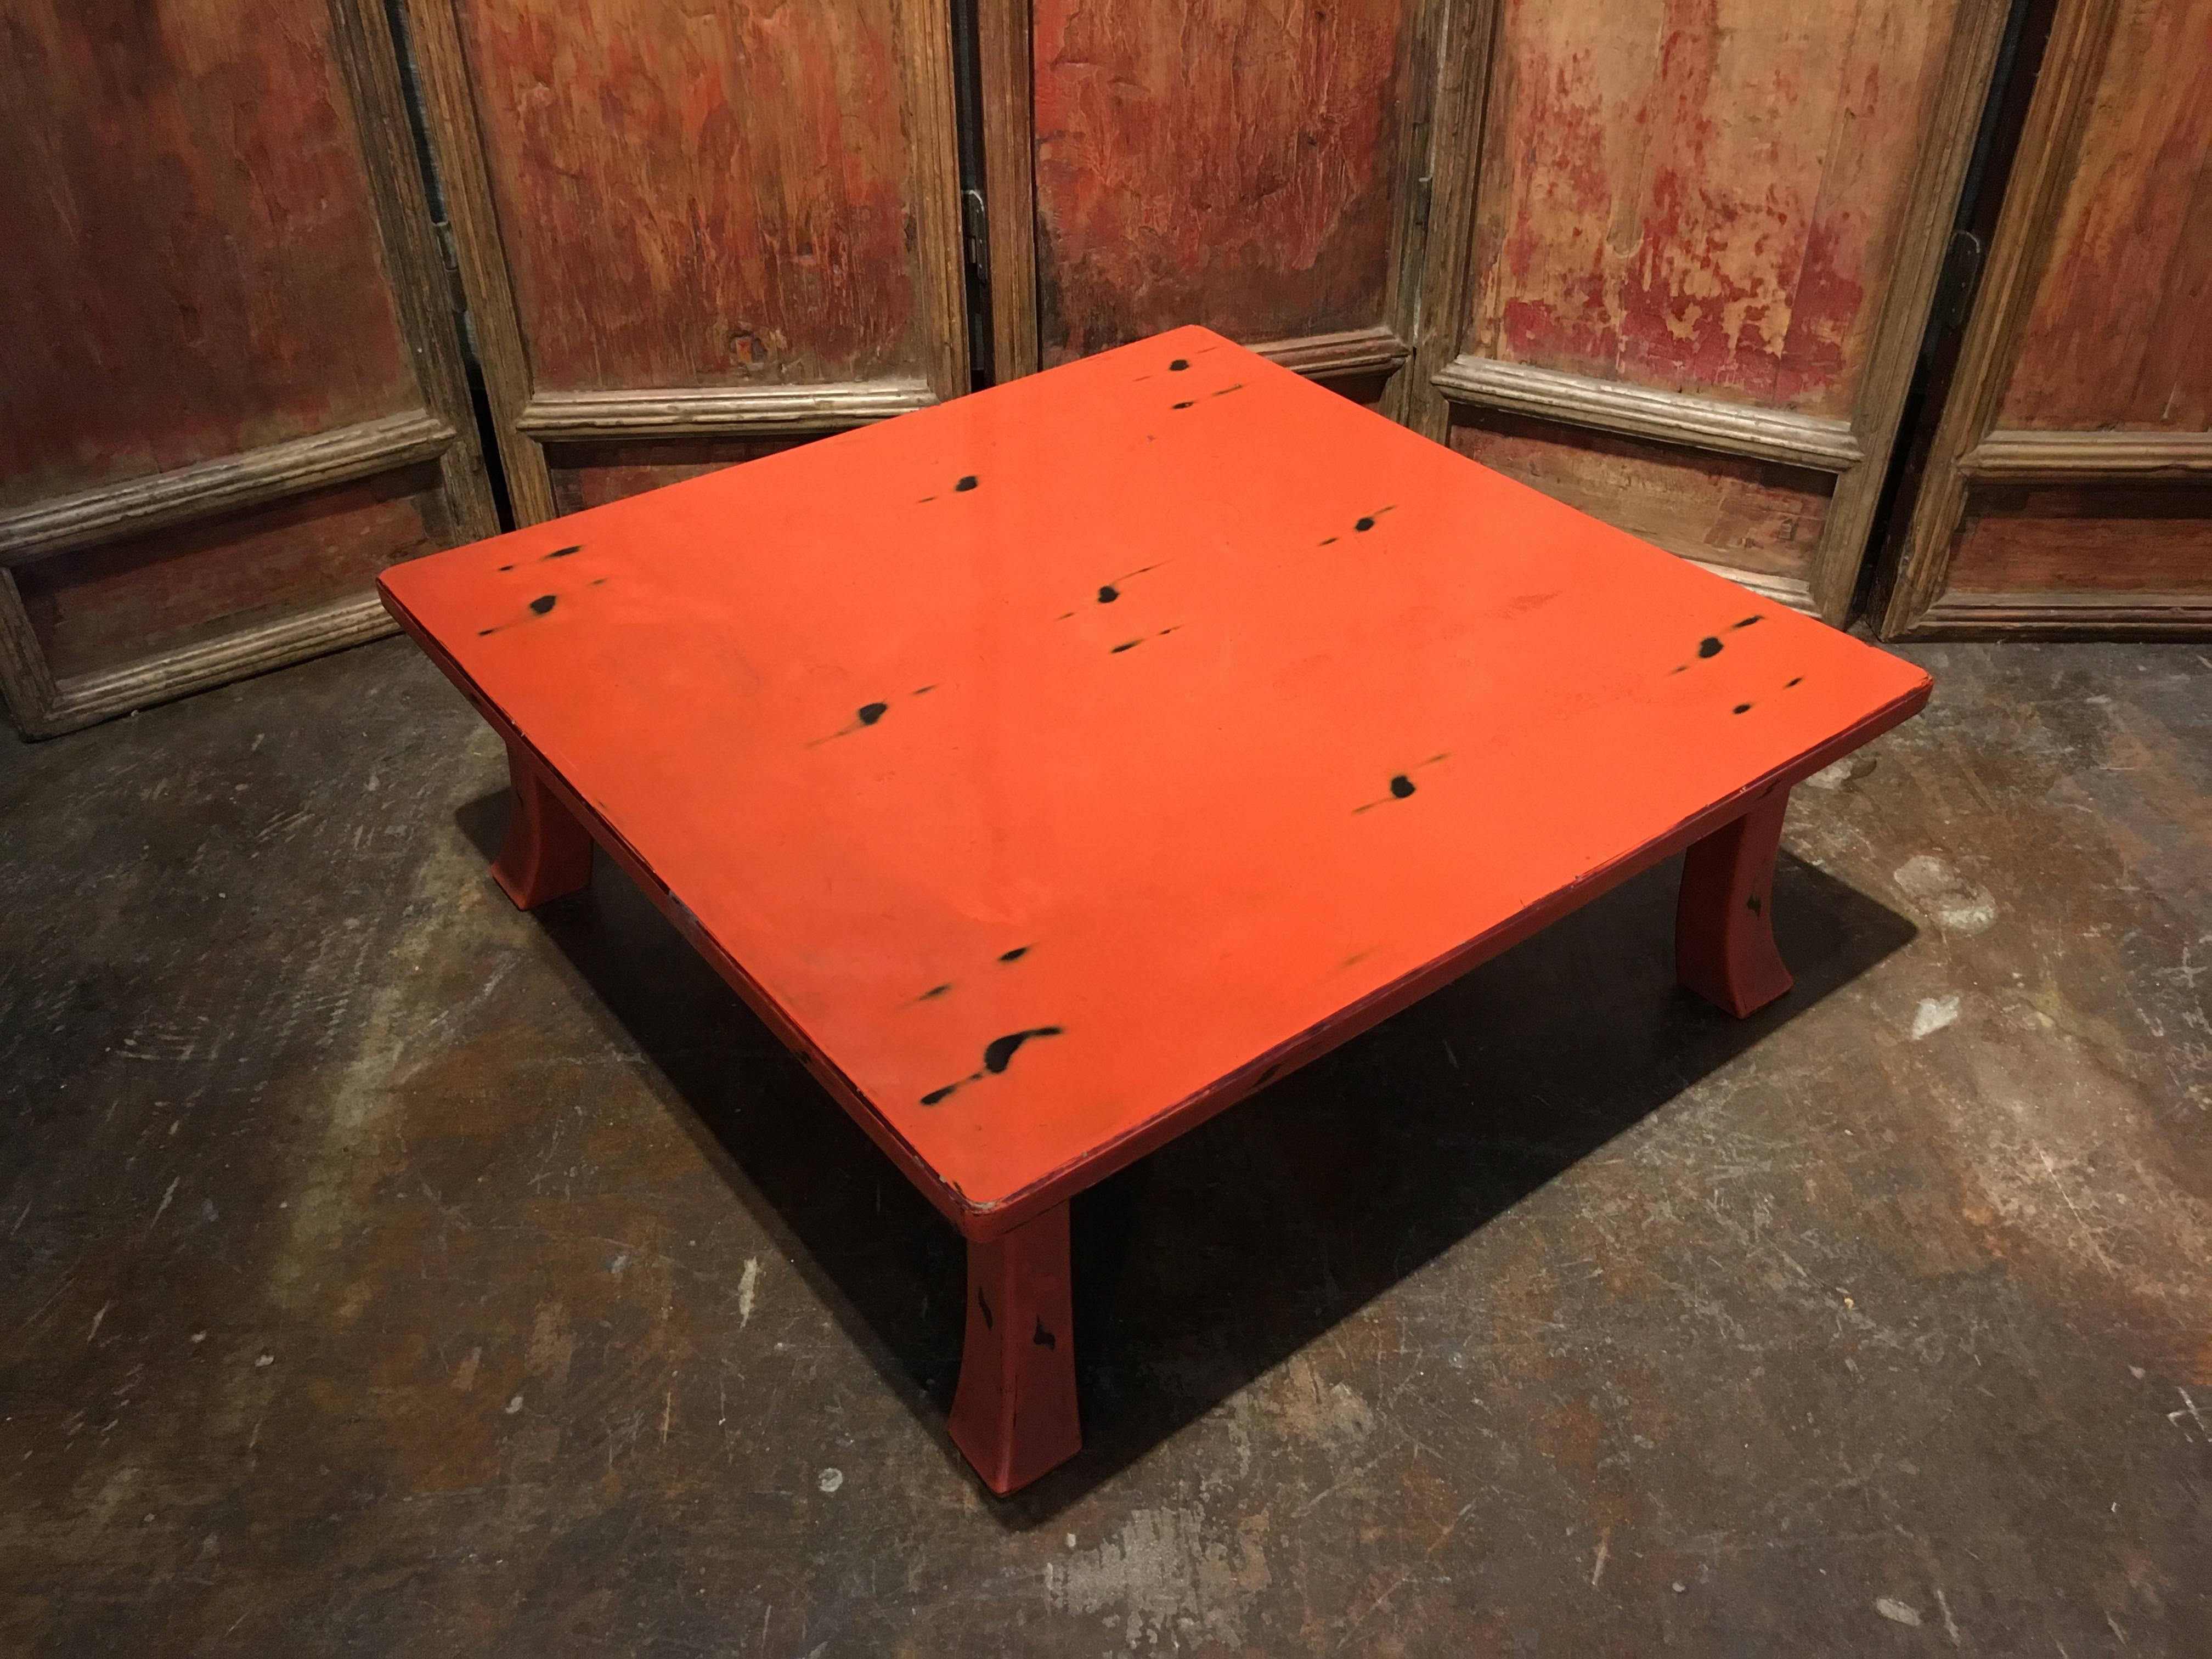 A stunning Japanese 1920s Taisho period negoro lacquer table. Originally used as a tea table, and bearing the hallmarks of use. 
The low square table of tradition design, with a large square top over slightly tapered and flared legs, calling to